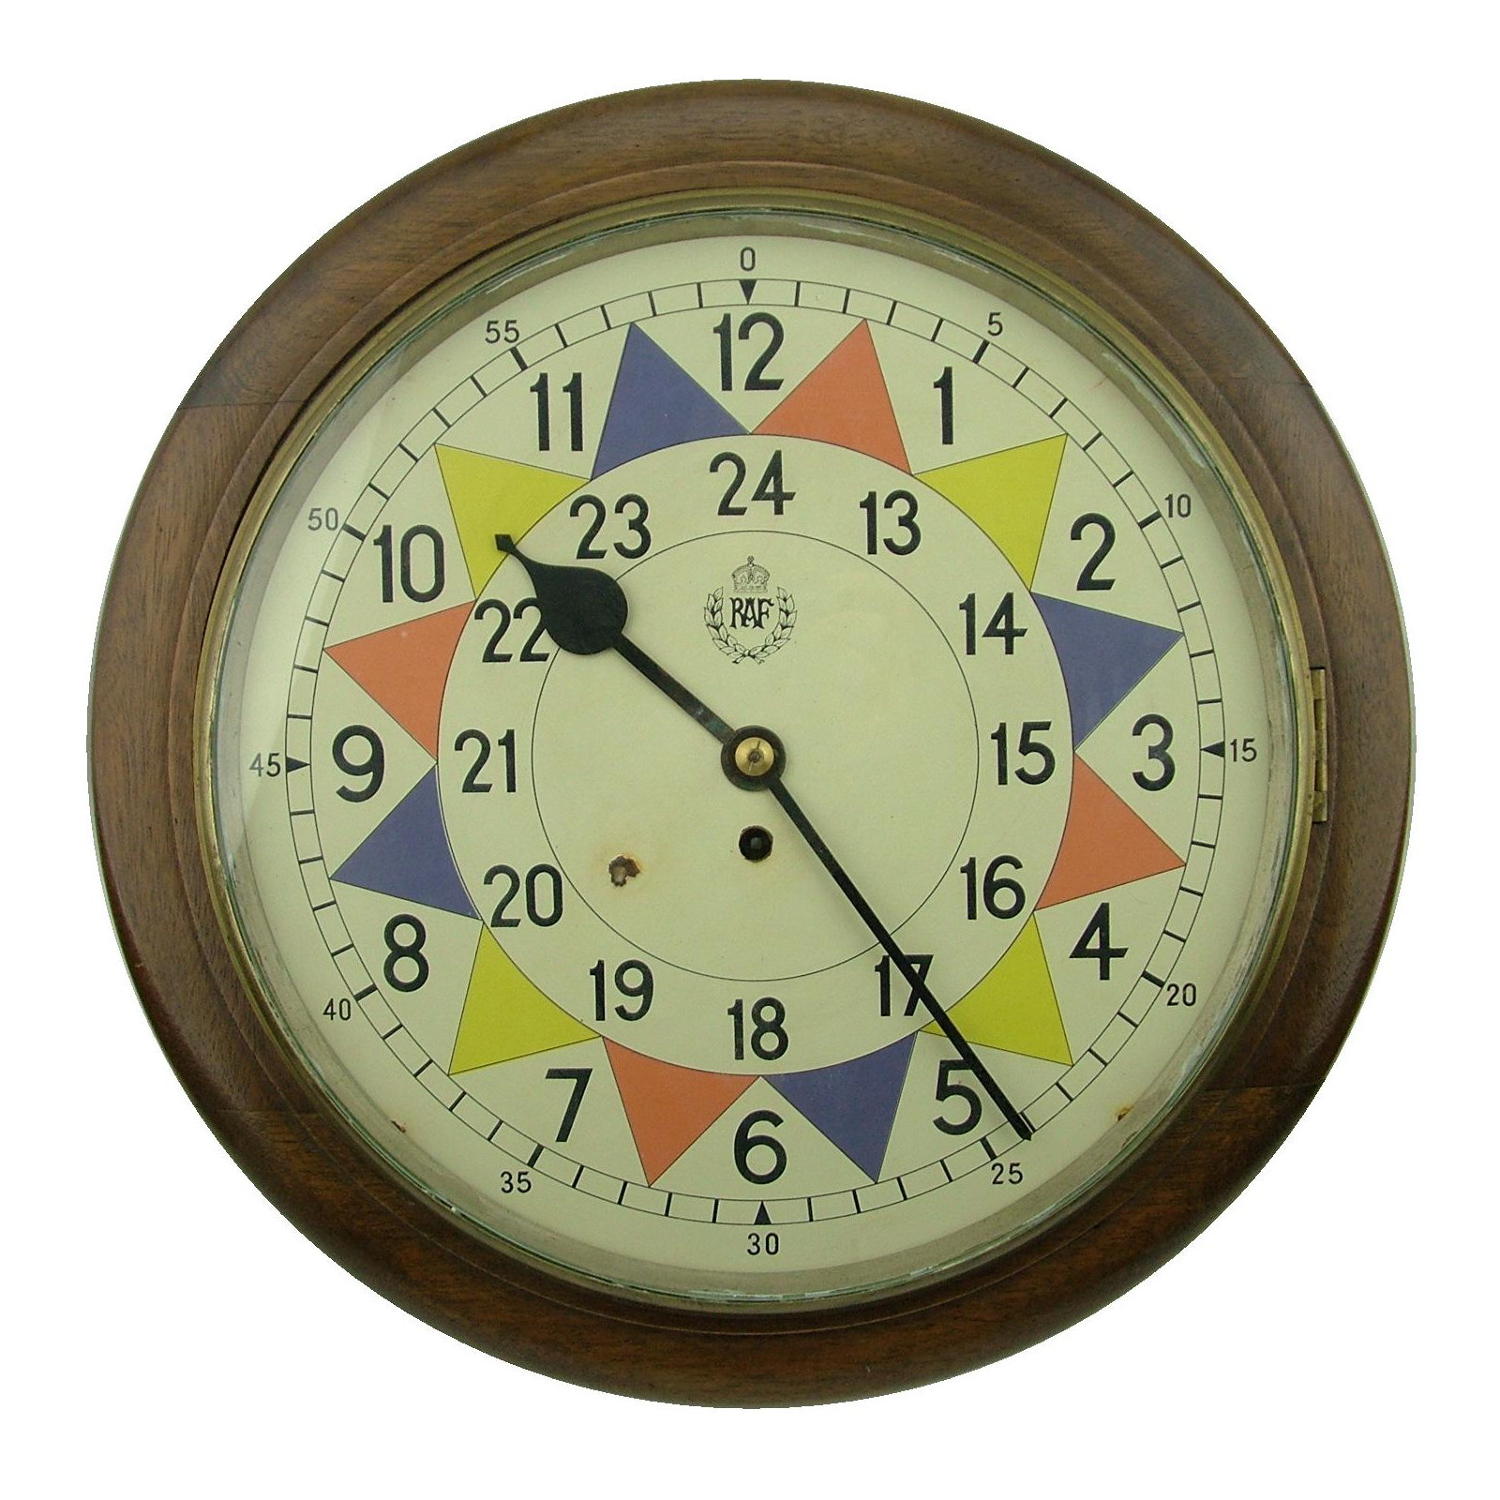 RAF station Sector clock, type 1